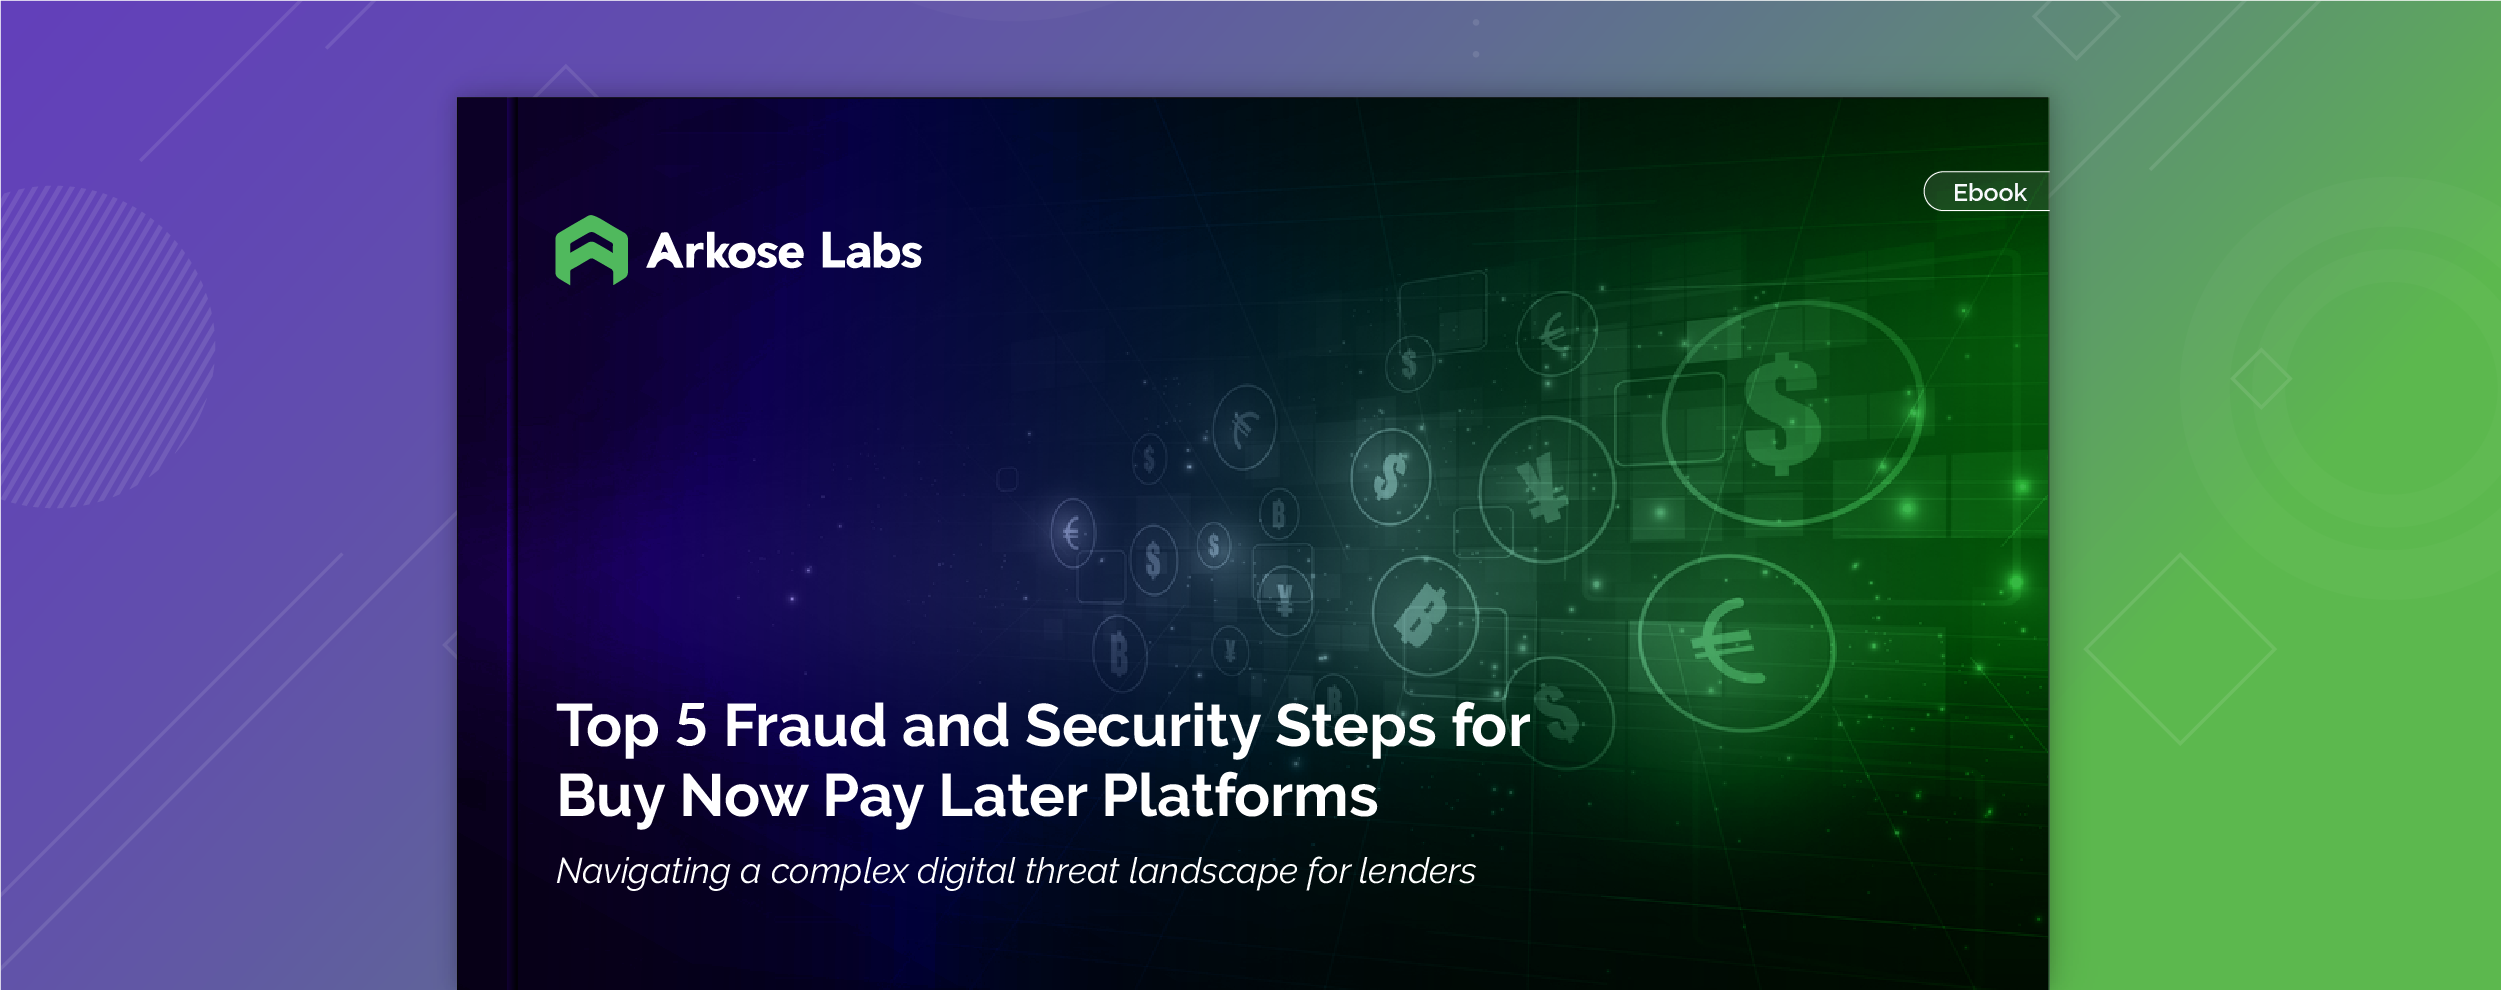 Top 5 Fraud and Security Steps for Buy Now Pay Later Platforms ebook